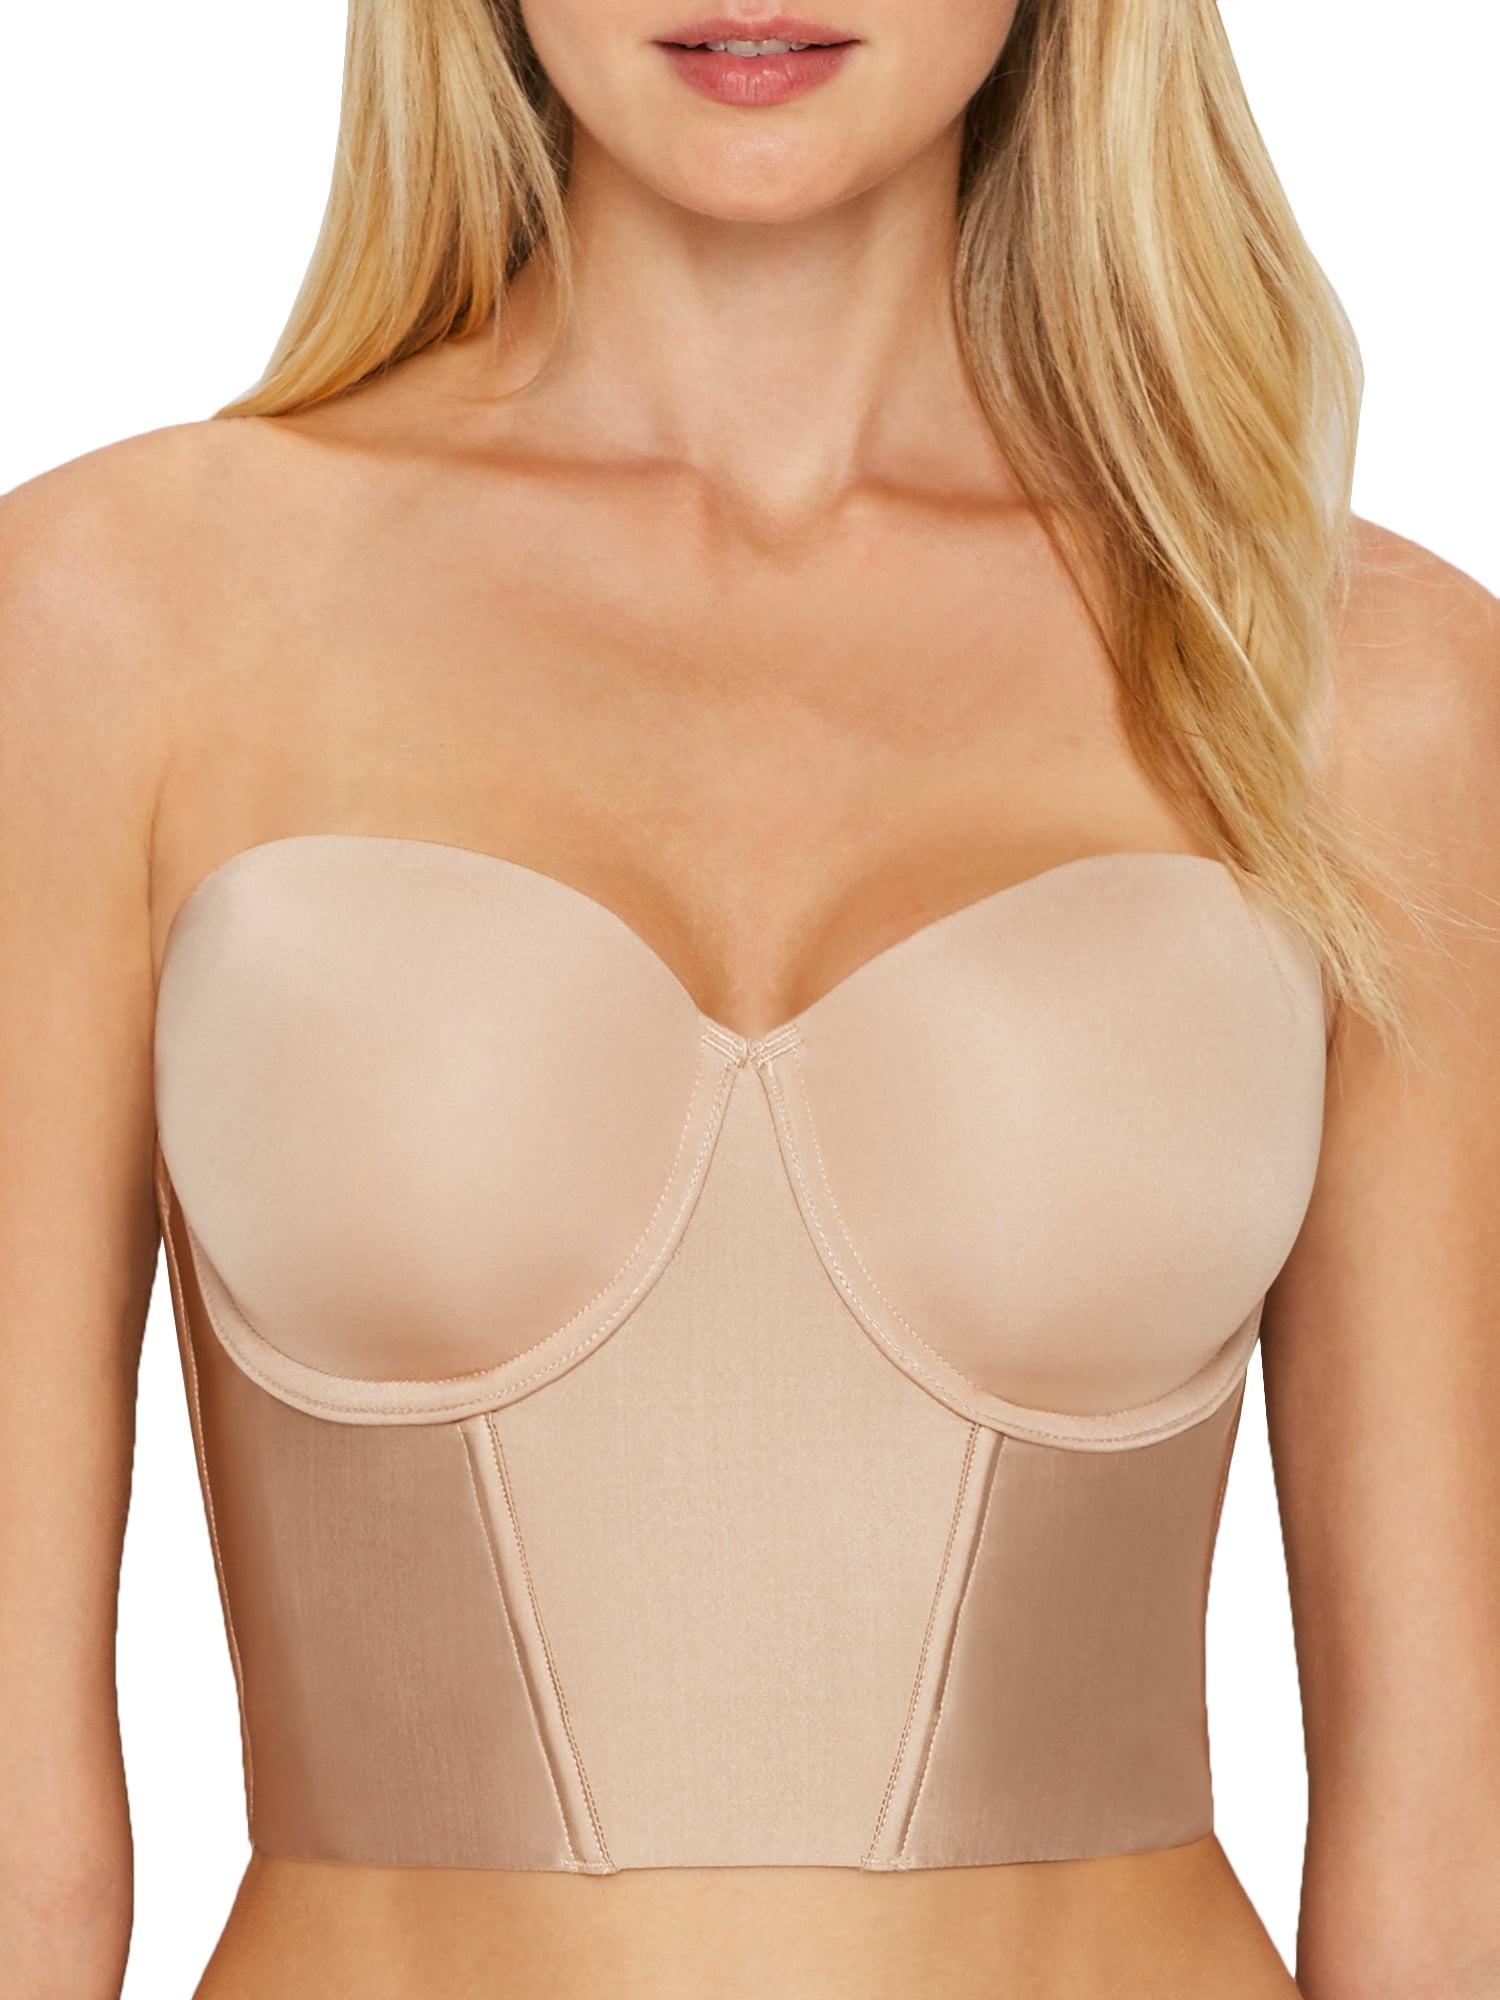 The Bridal Bra™ Backless Front Closure